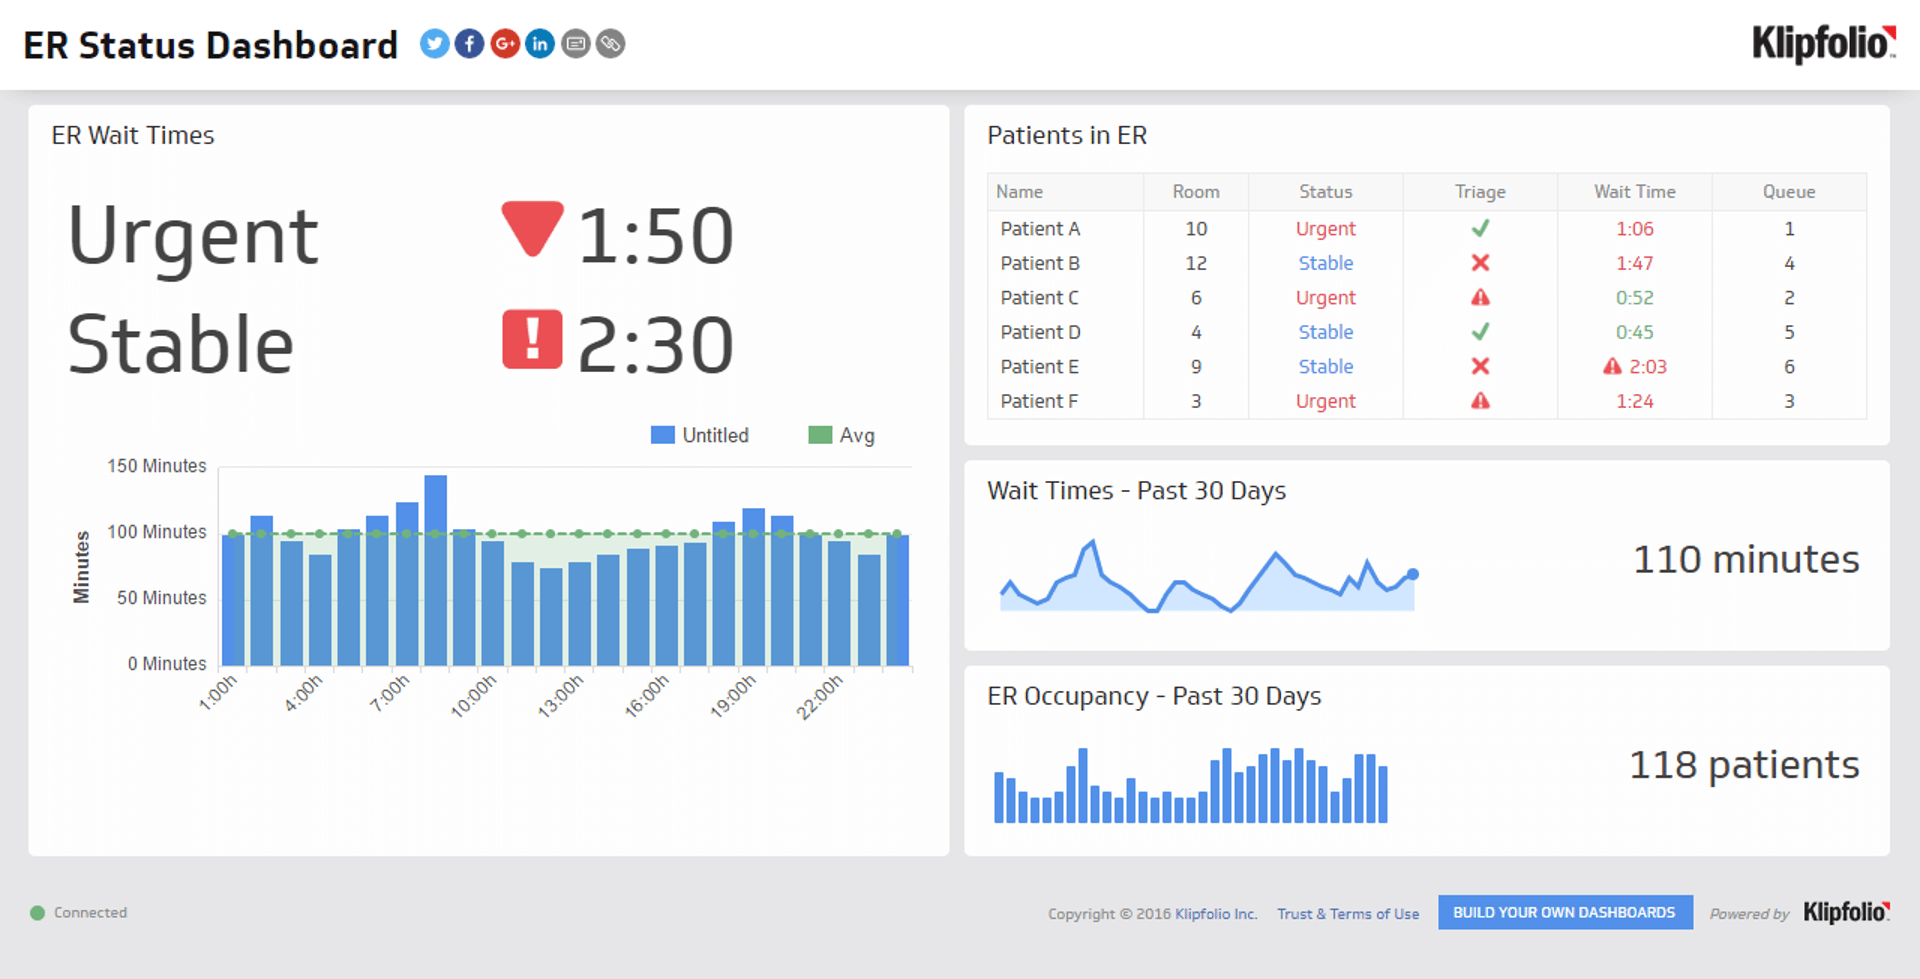 Business Dashboard Examples - ER Status Dashboard